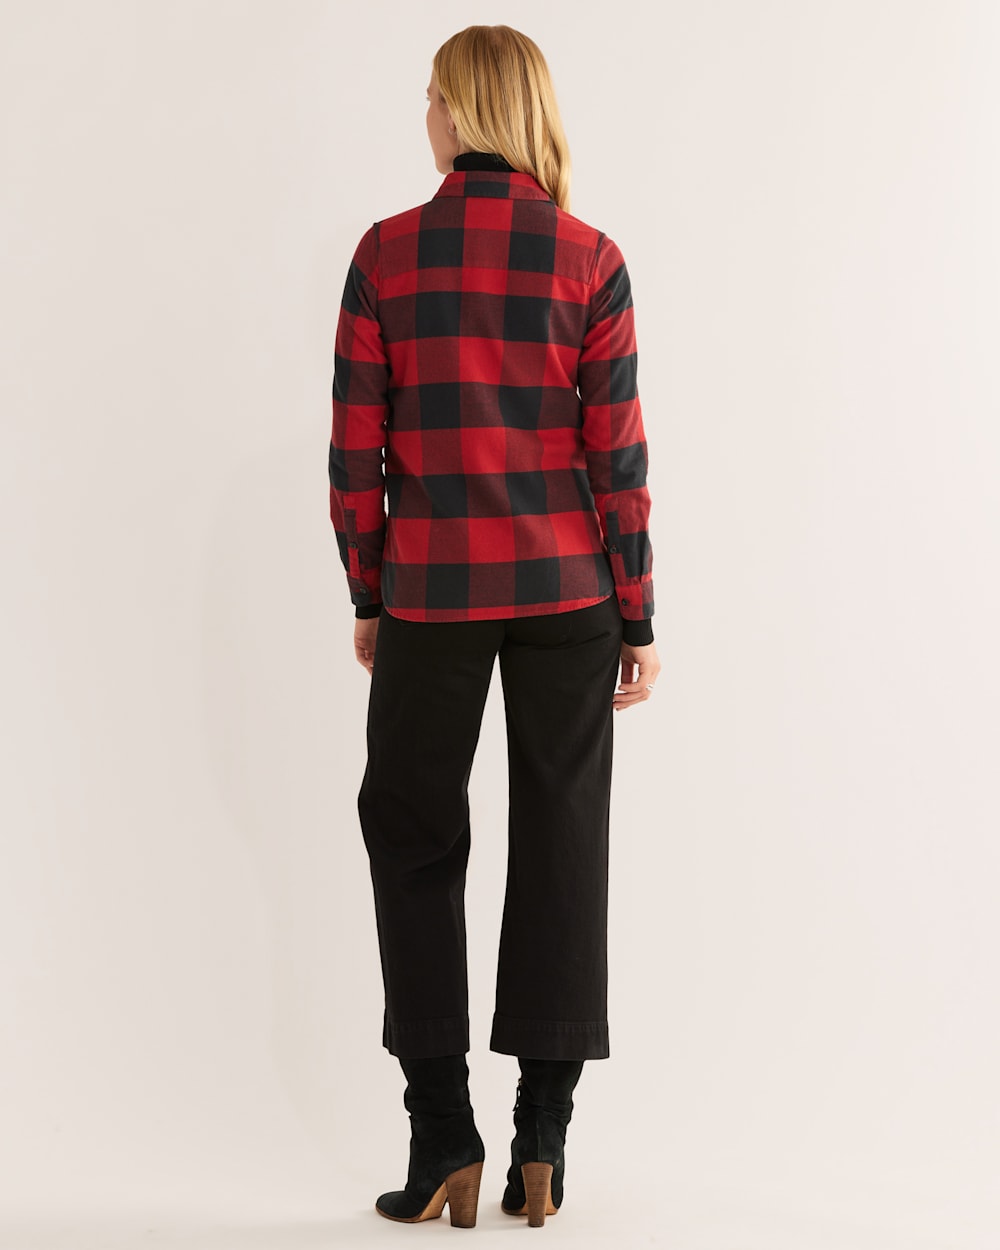 ALTERNATE VIEW OF WOMEN'S MADISON DOUBLE-BRUSHED FLANNEL SHIRT IN RED/BLACK BUFFALO CHECK image number 3